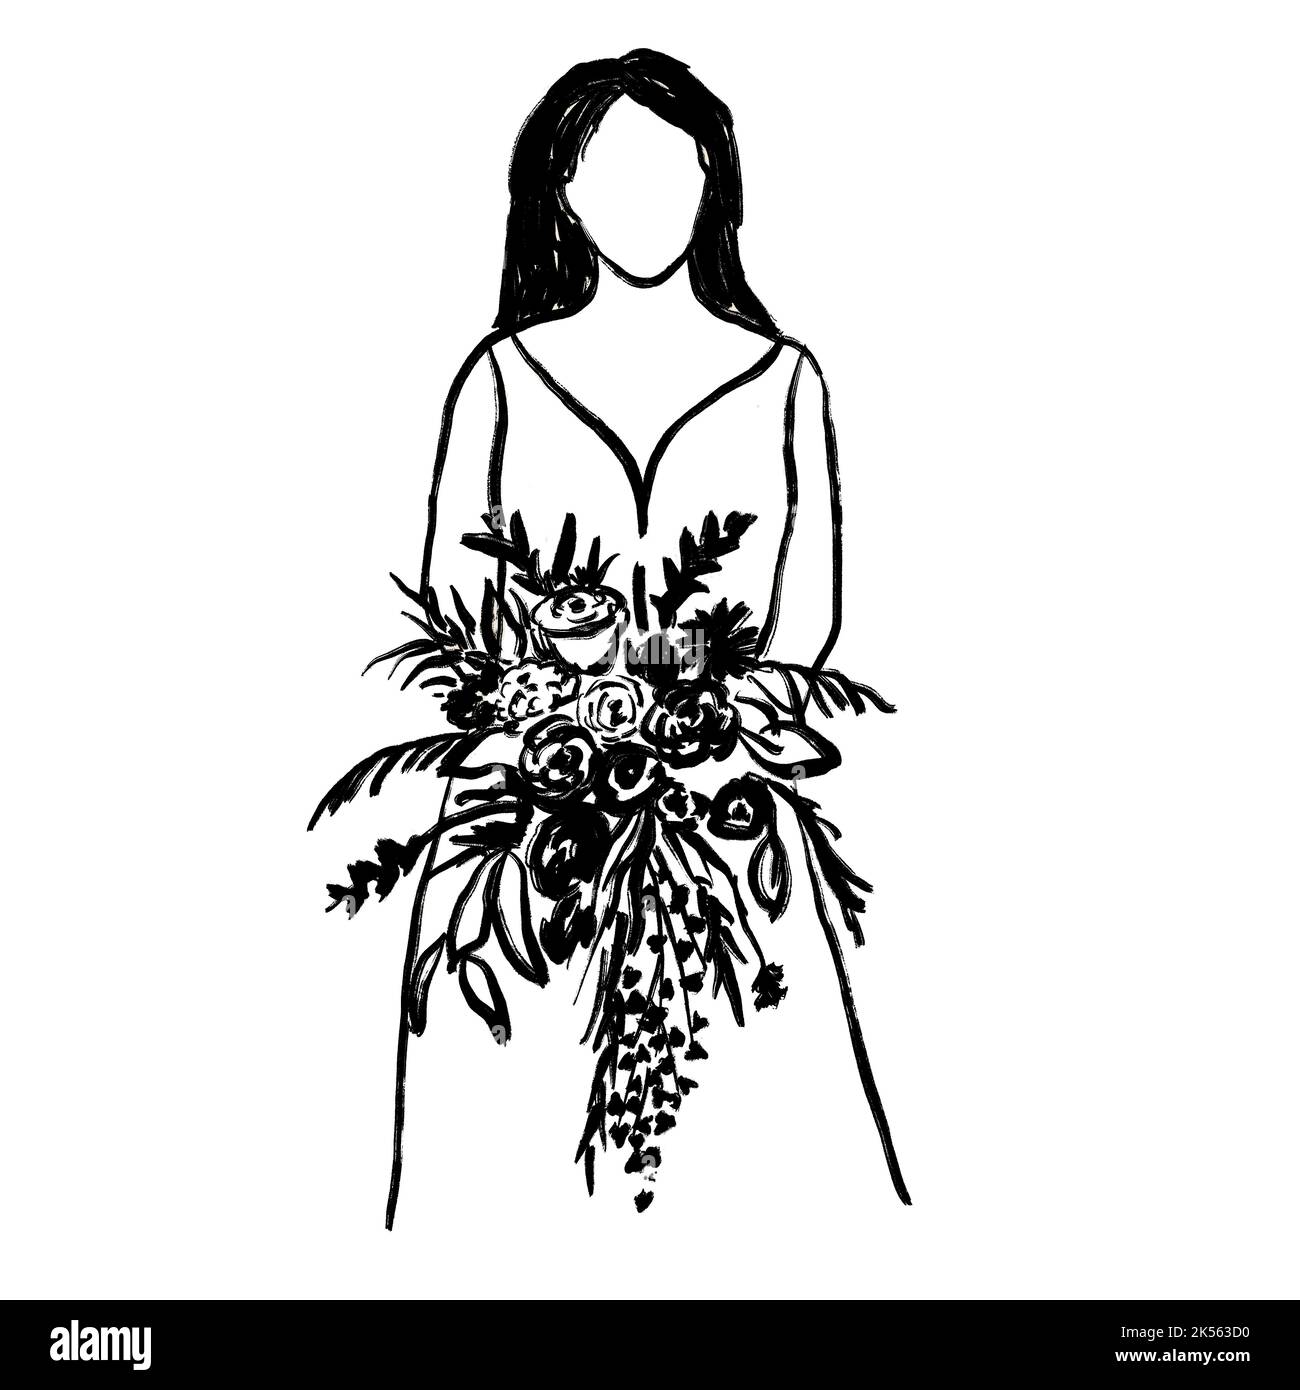 Silhouette woman with flowers Cut Out Stock Images & Pictures - Alamy